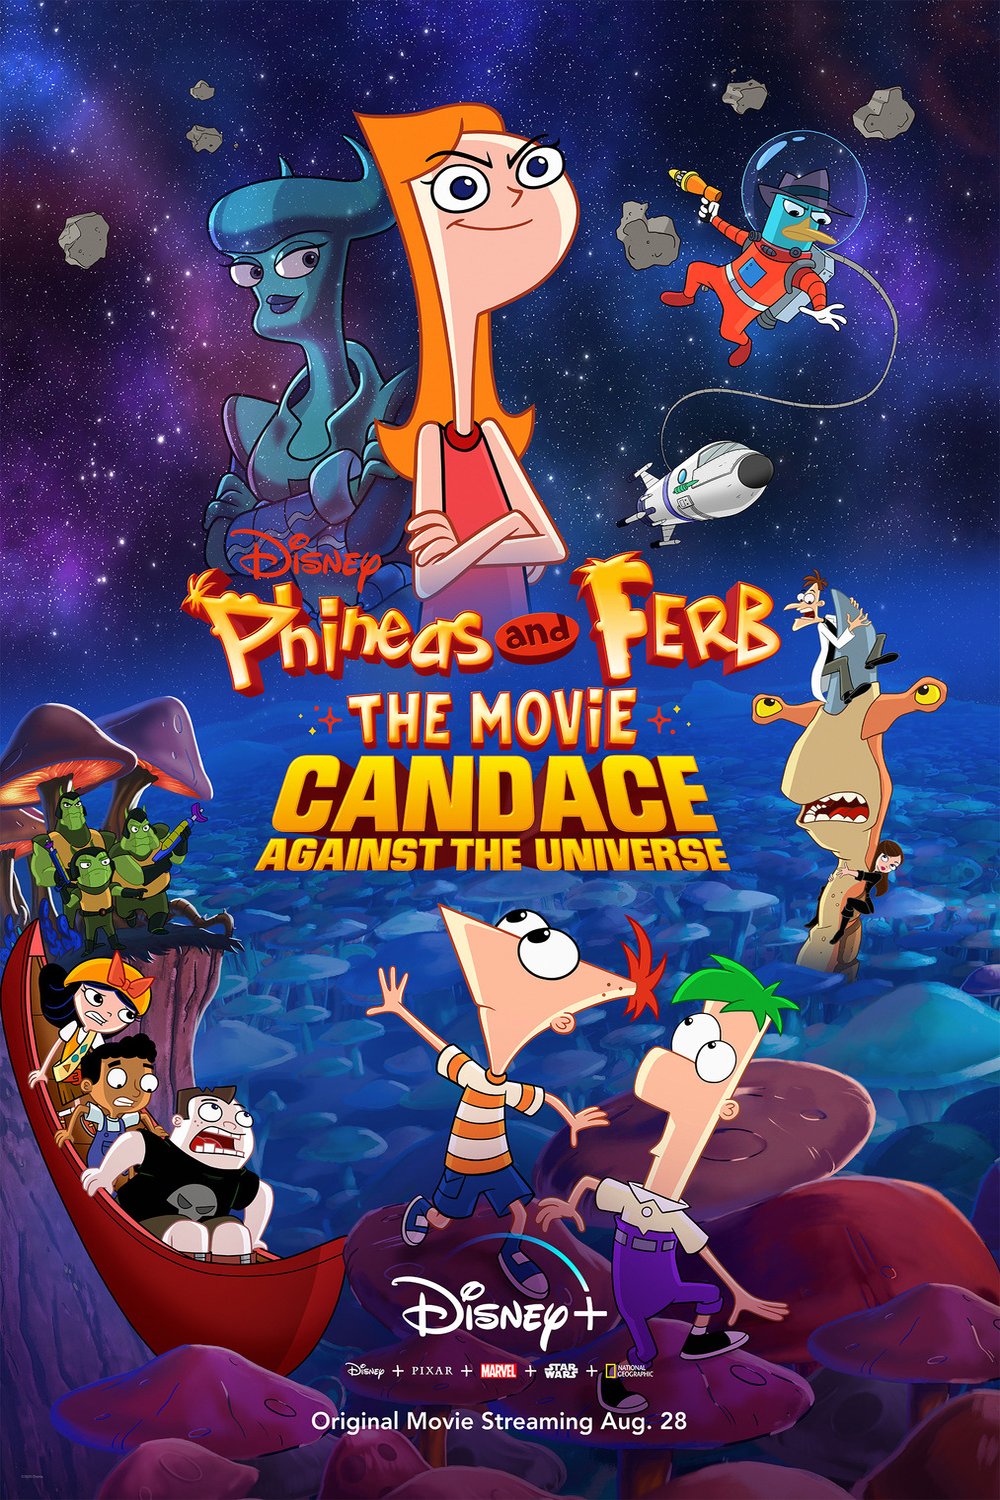 Poster of the movie Phineas and Ferb the Movie: Candace Against the Universe